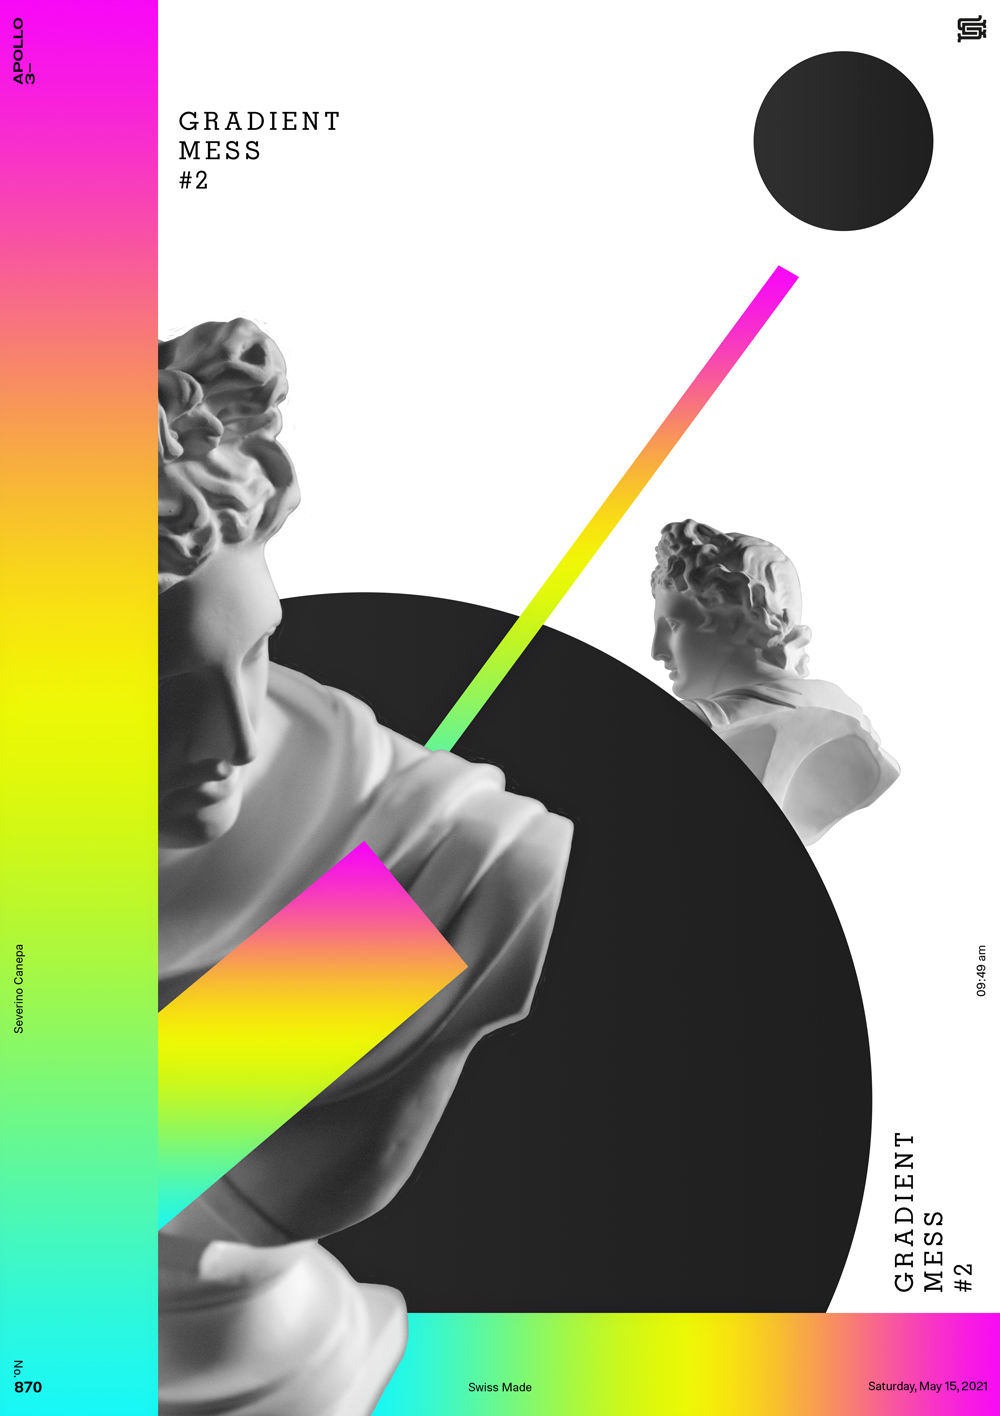 Graphic creation I created with colorful and dark shapes and Apollo's statues